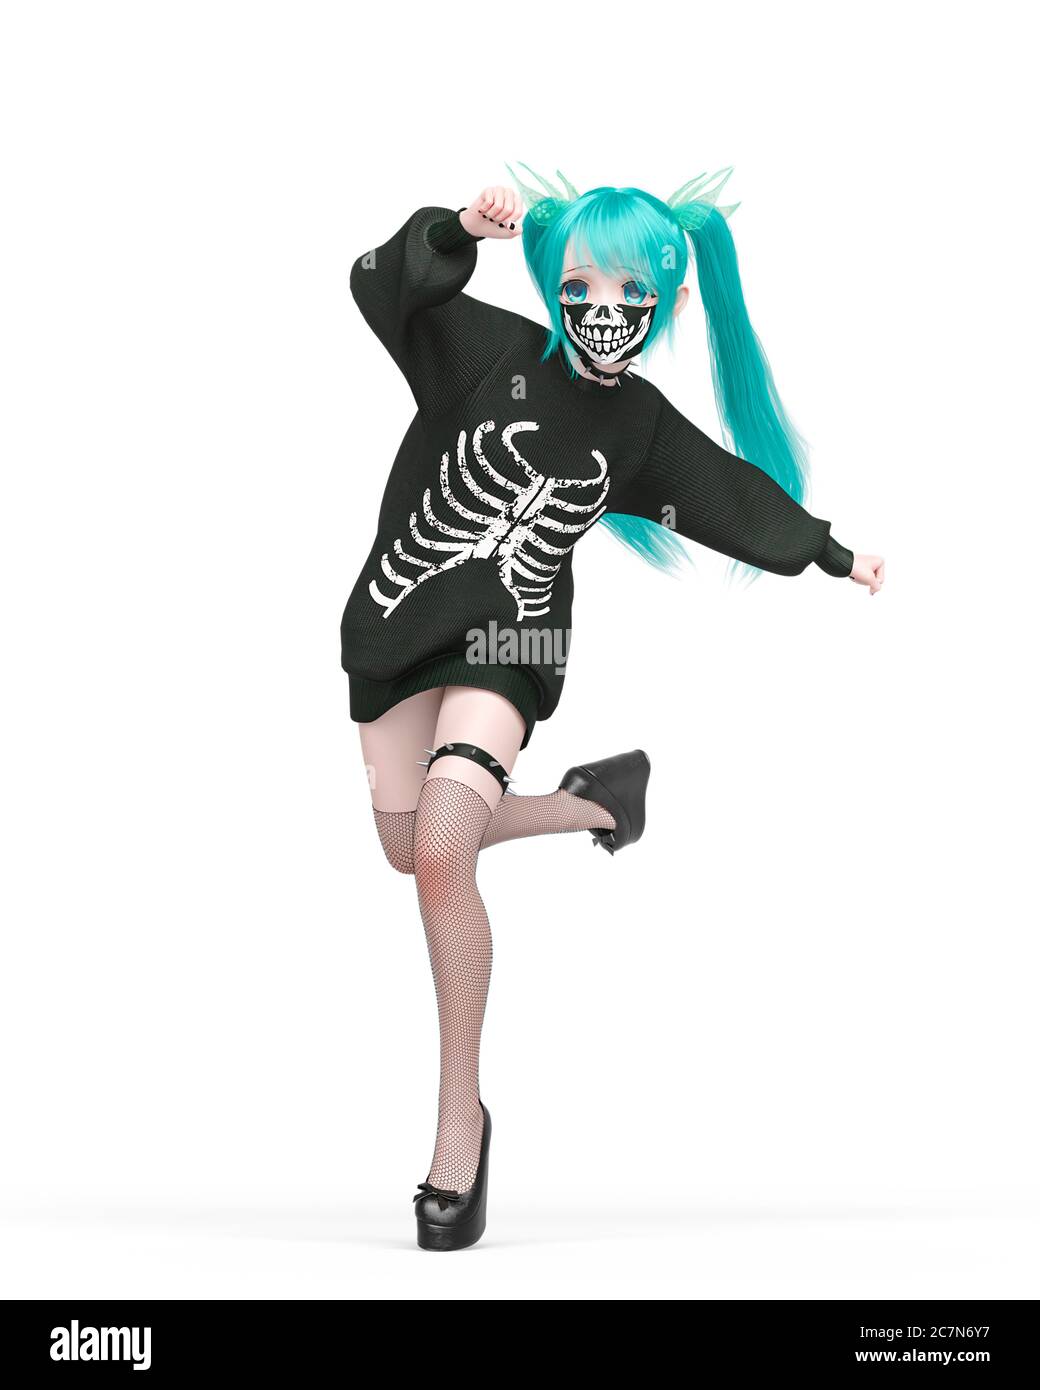 street girl is running and wearing a skeleton outfit on kwaii anime style,  3d illustration Stock Photo - Alamy